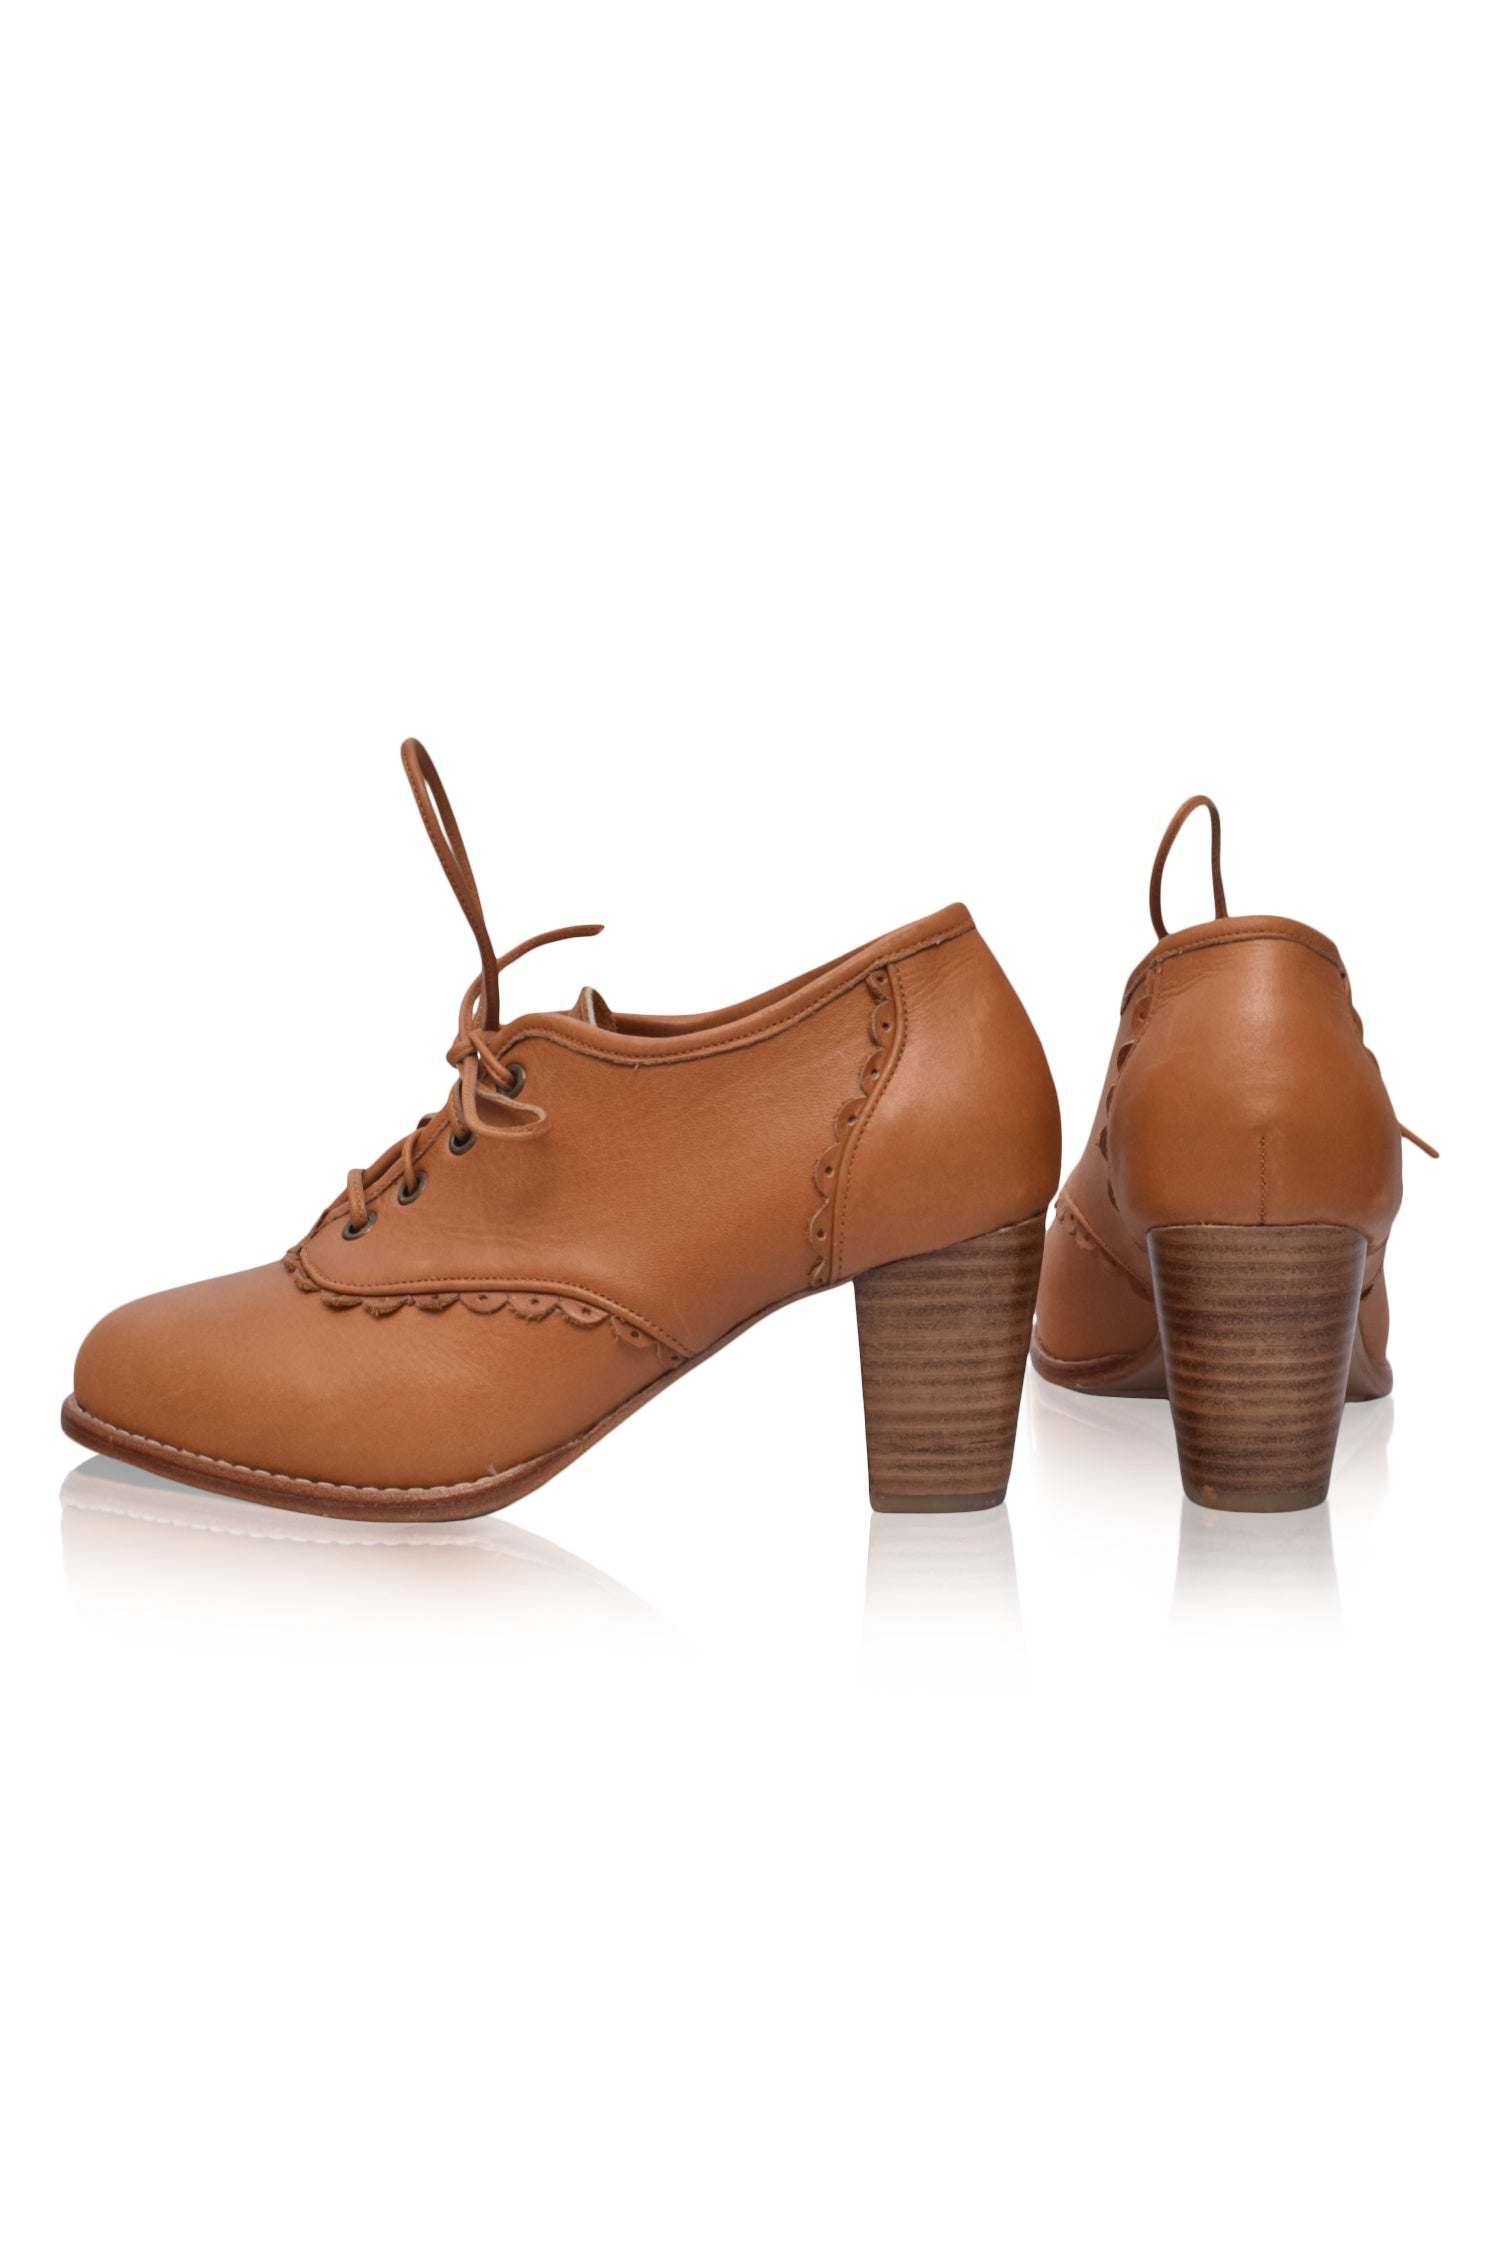 Milk tea color full leather strap low-heeled oxford shoes - Shop  karineshoes Women's Oxford Shoes - Pinkoi